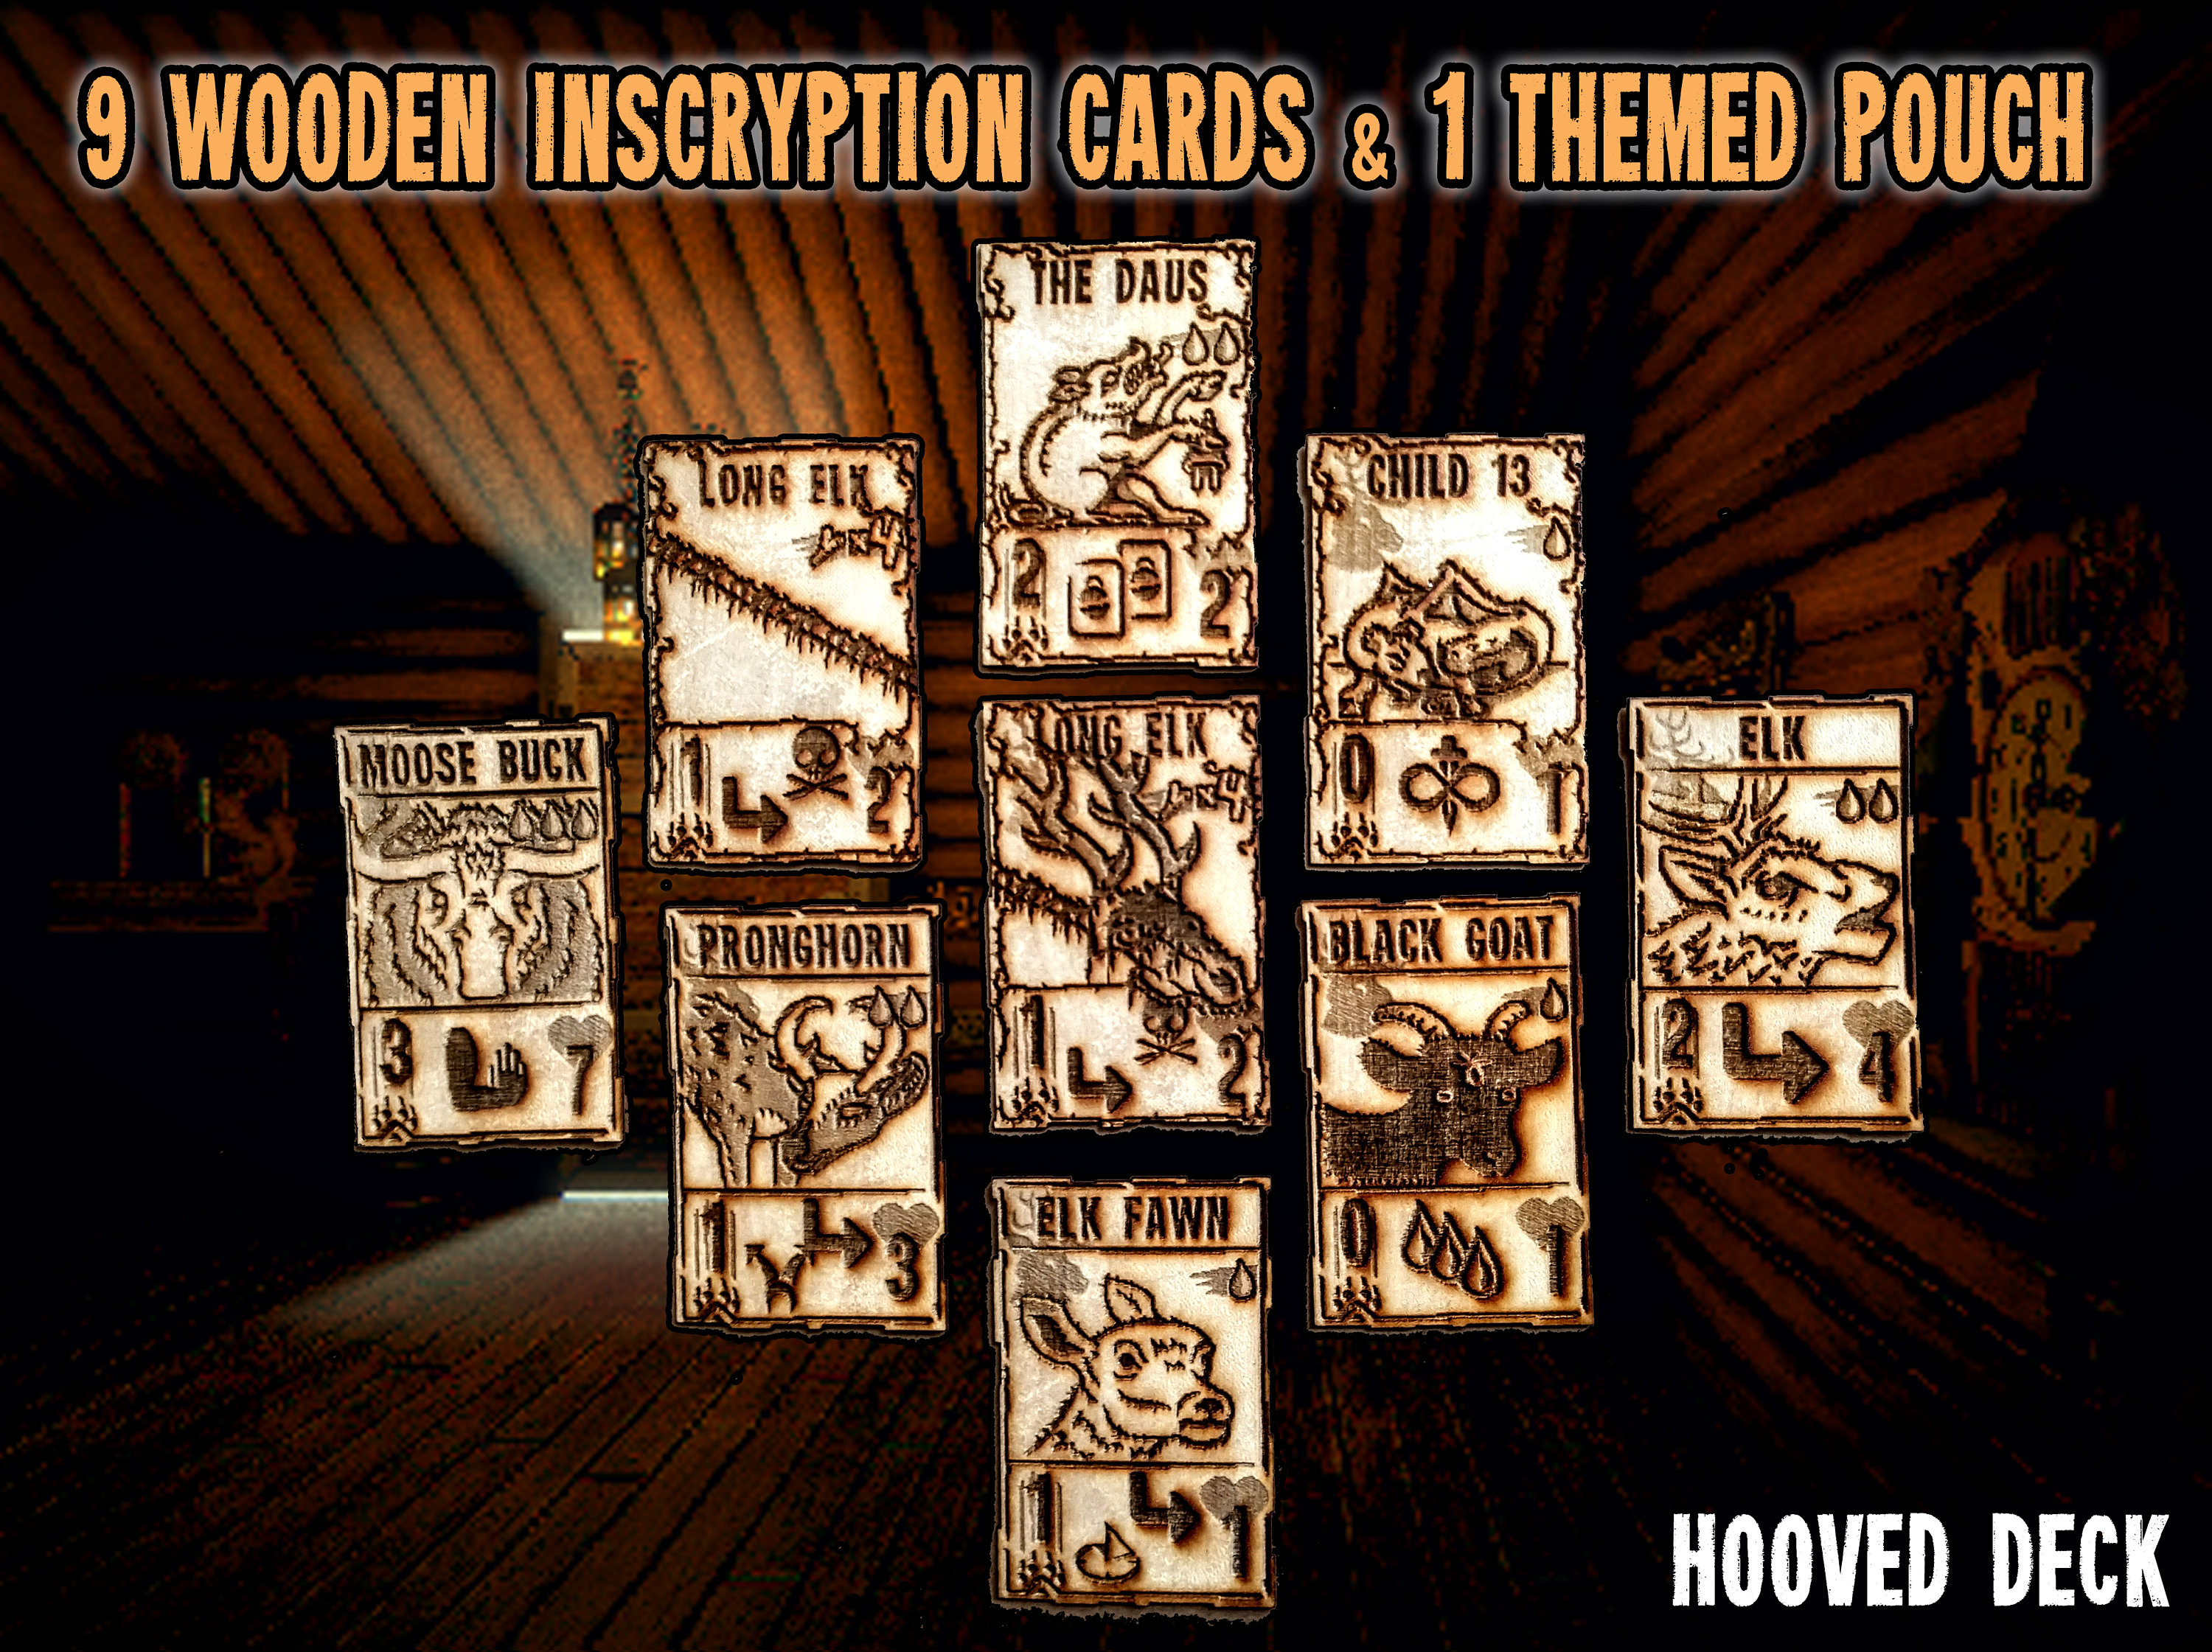 Inscryption Card game with 206 Laminated cards with playmat!